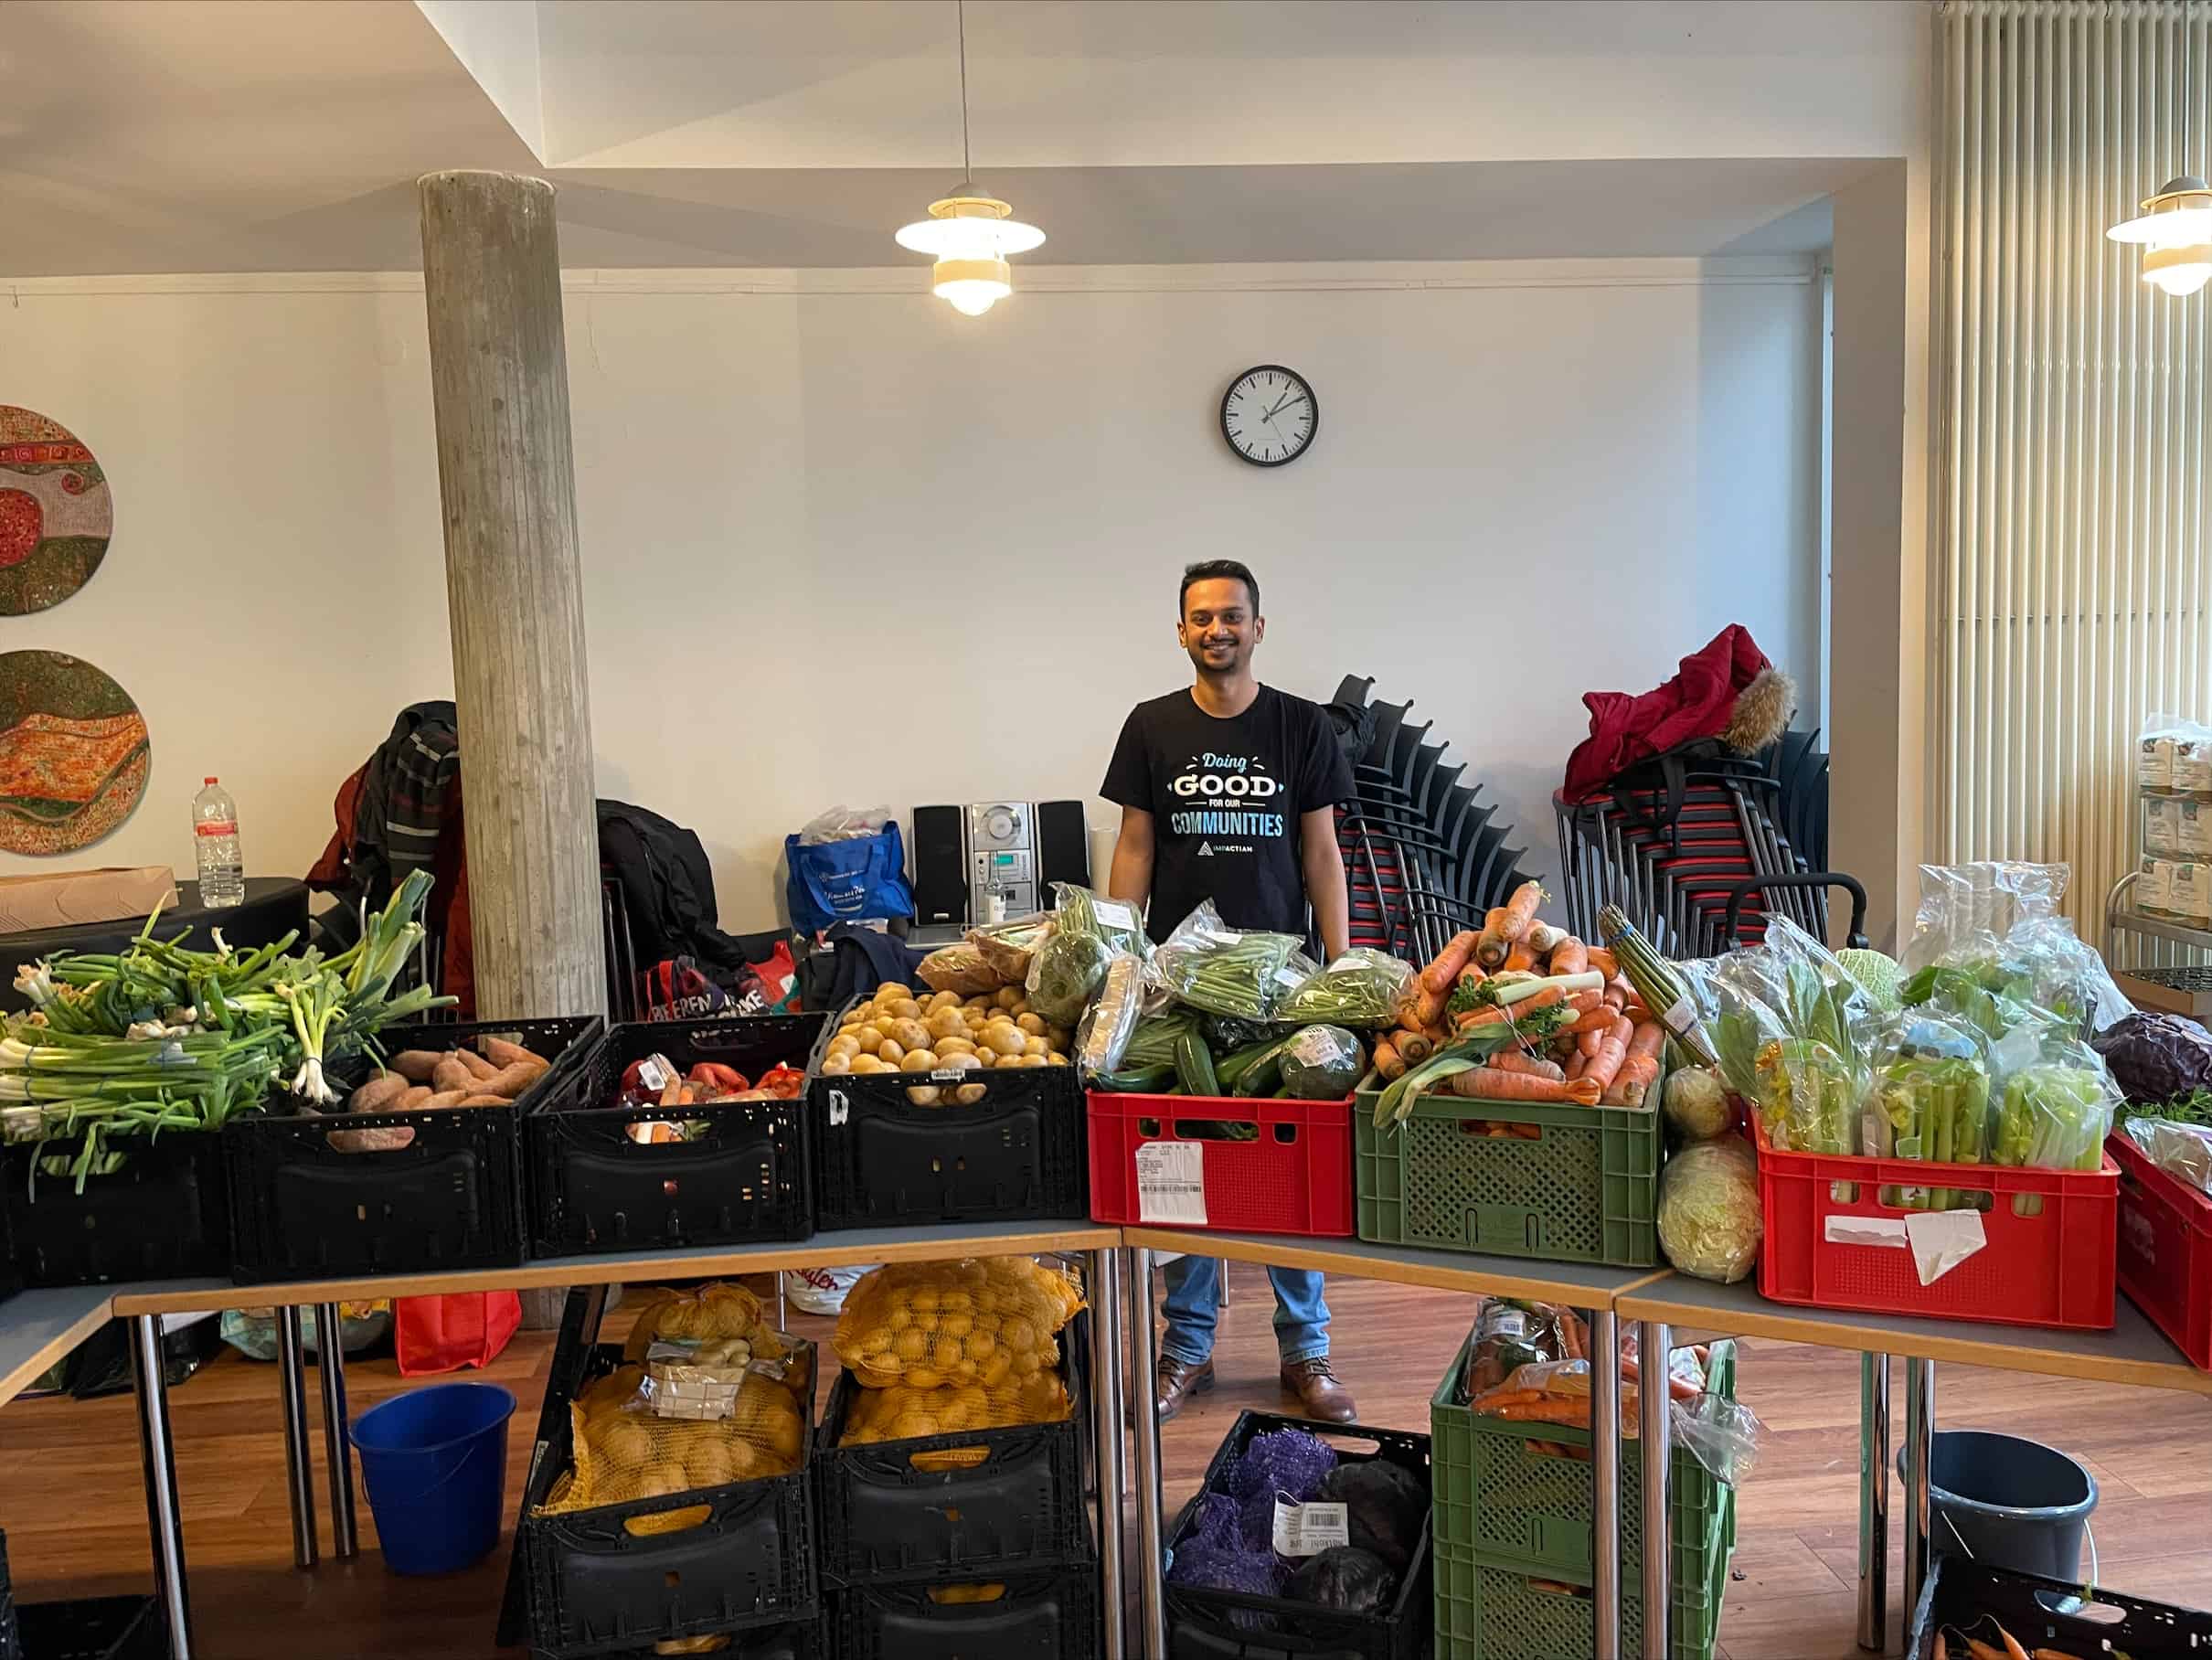 Jeevans Tafeltag surrounded by food at a food bank